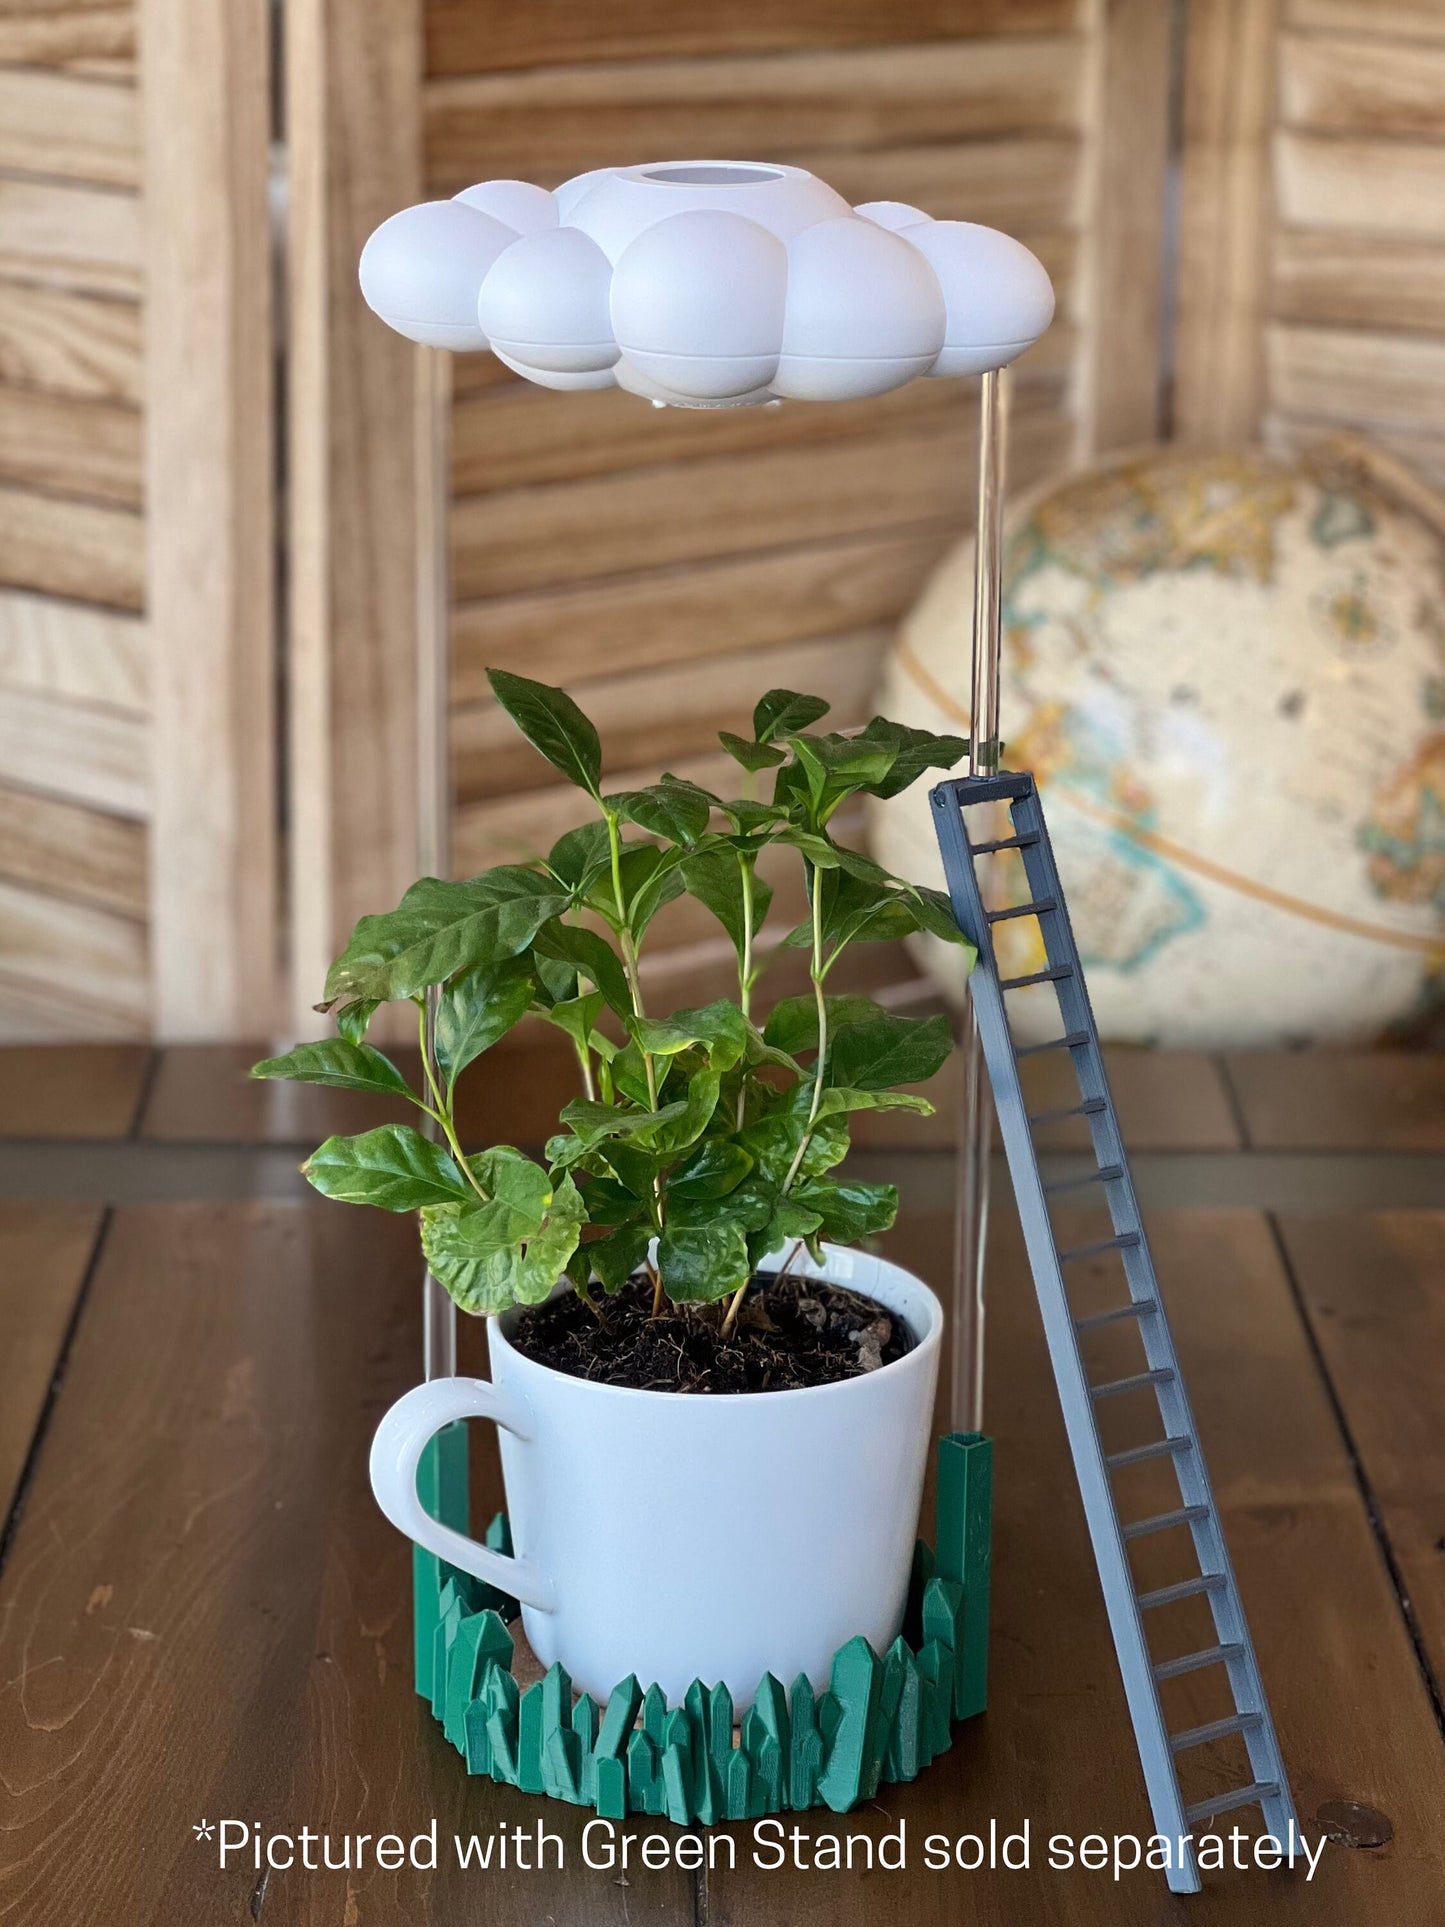 Original Dripping rain cloud by THE CLOUD MAKERS with Ladder